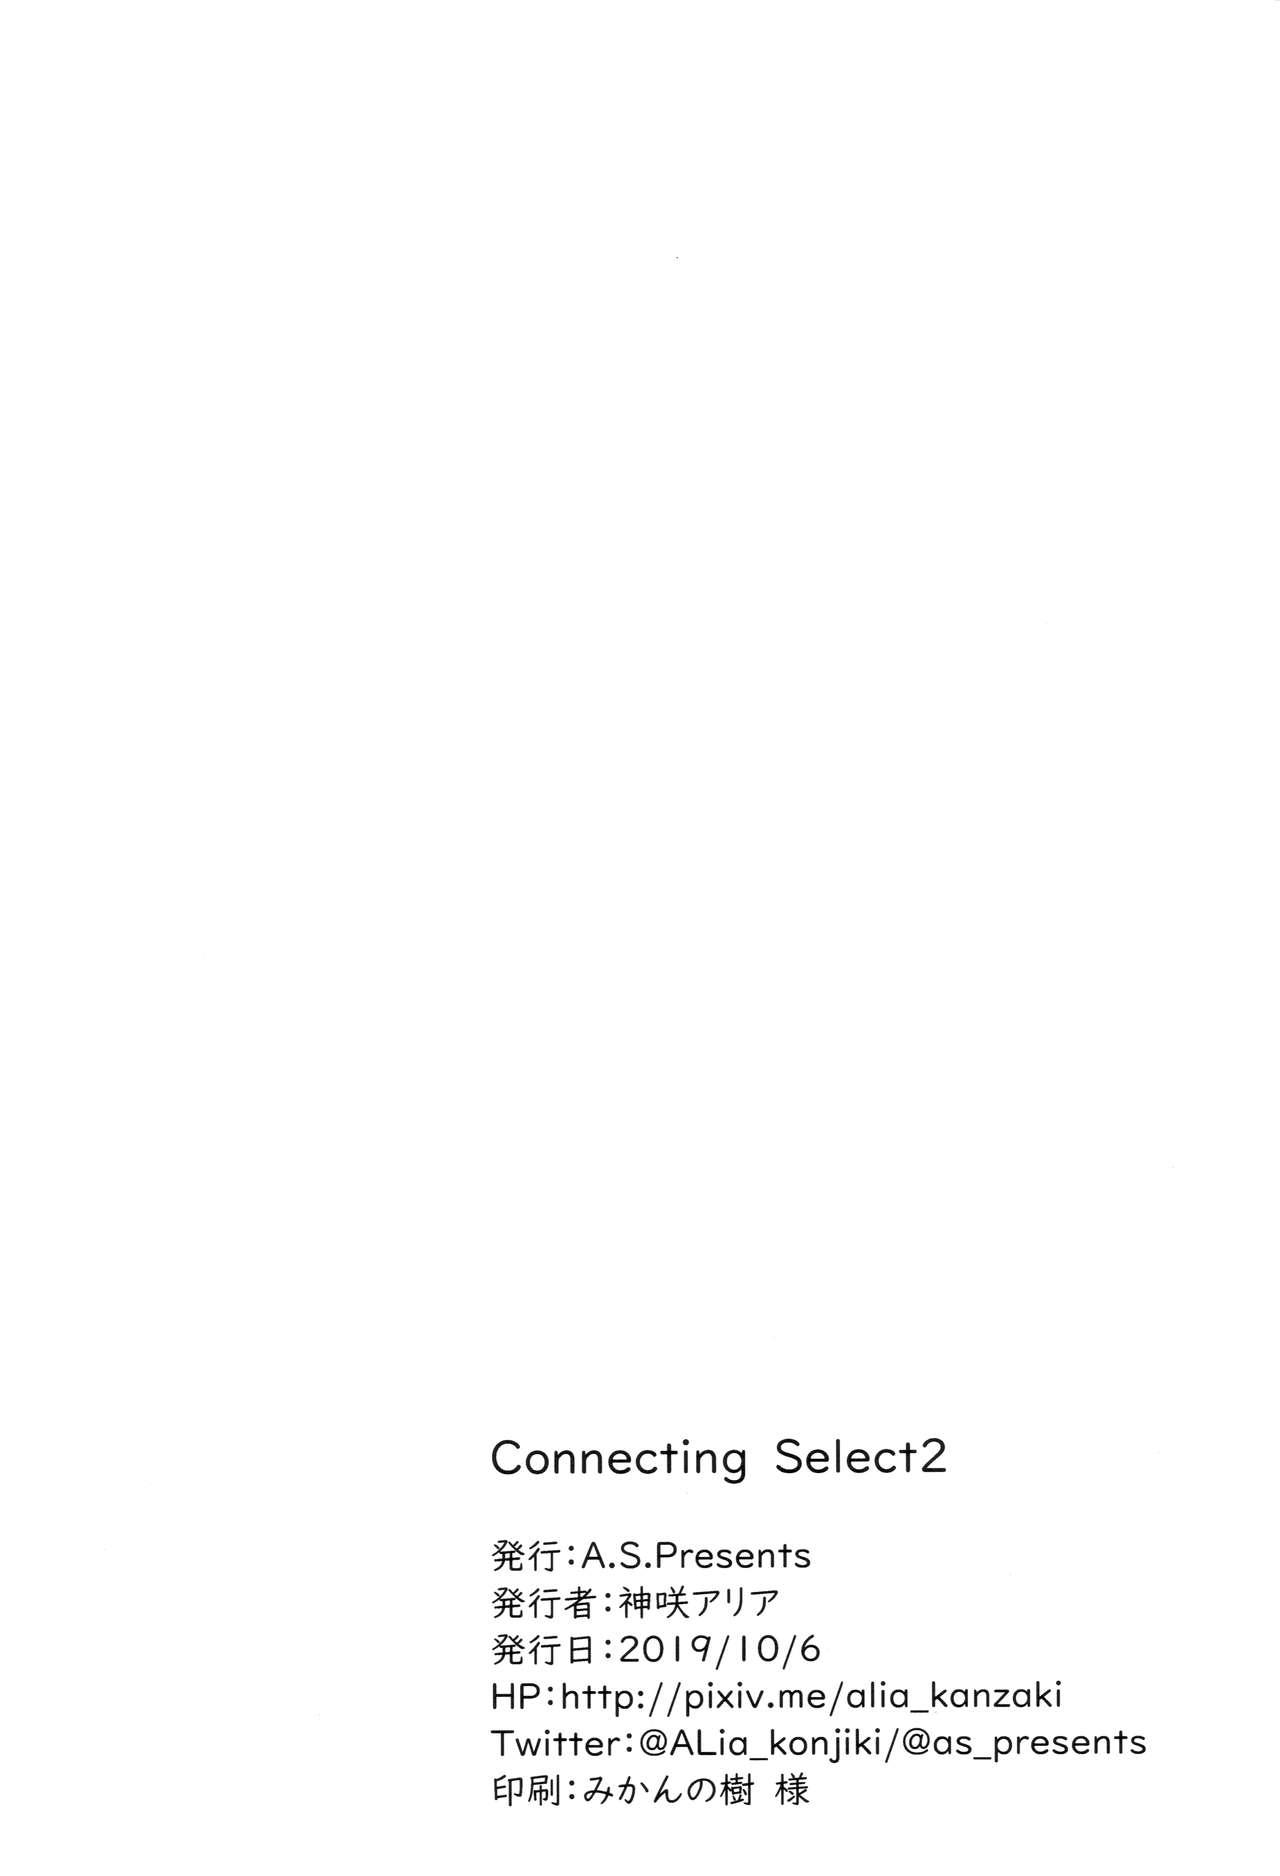 Connecting Select 2 12